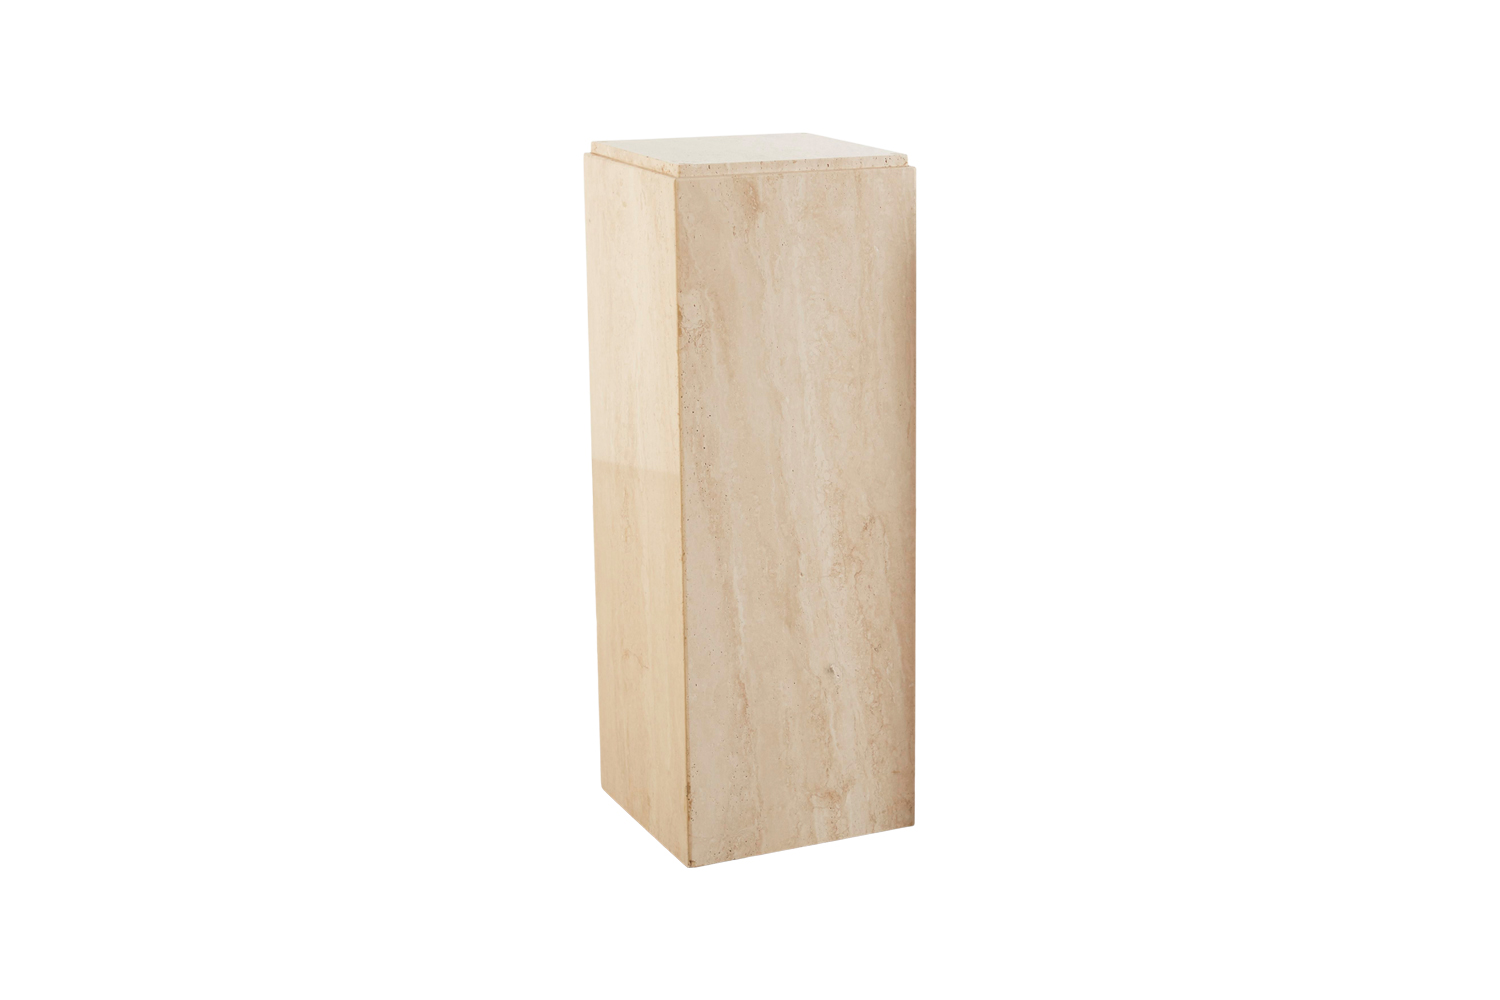 Similar Travertine Pedestals to the vintage one sourced by stylist, Anna Unwin, is $1,195 each at Chairish. For a new option in other types of stone, the Marble Plinth from Menu is $955.96 at Danish Design Store.